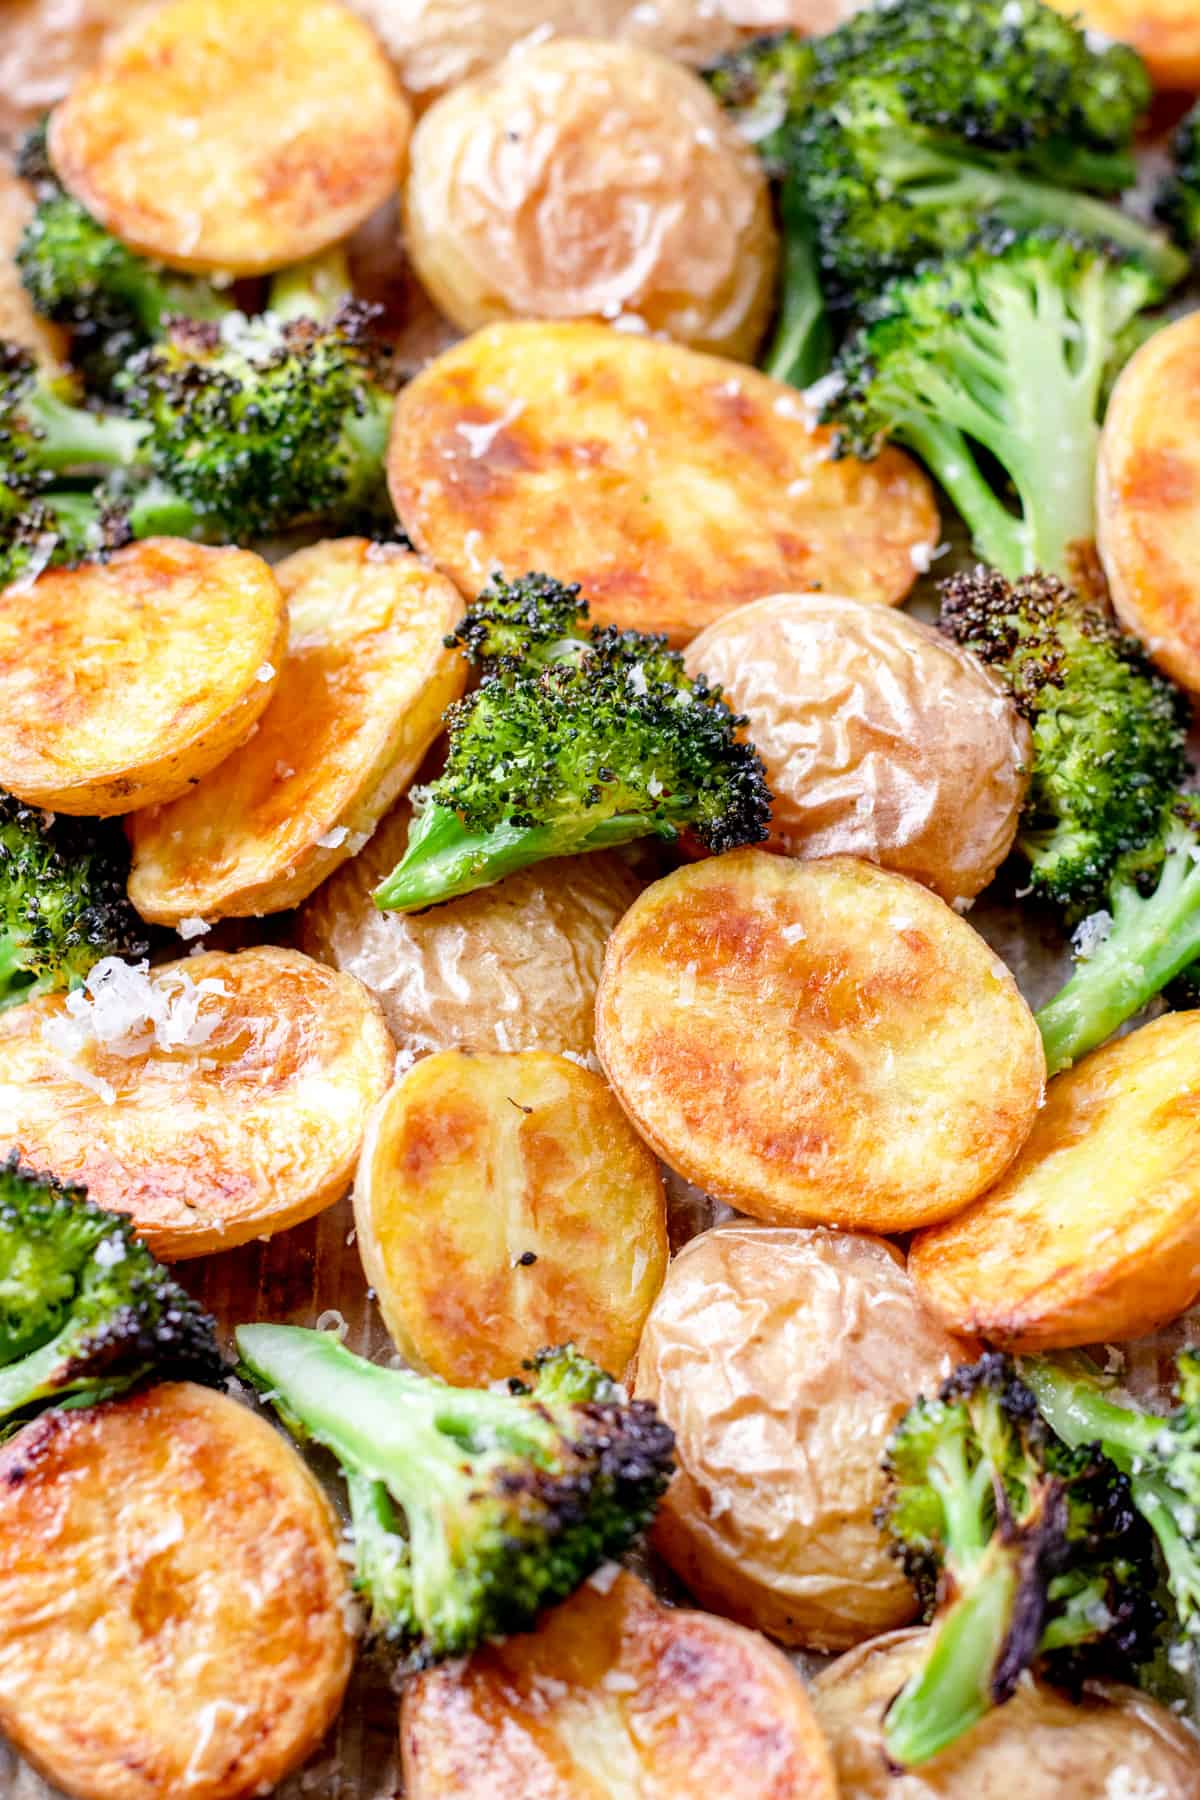 Roasted Potatoes and Broccoli, , topped with grated Parmesan cheese.